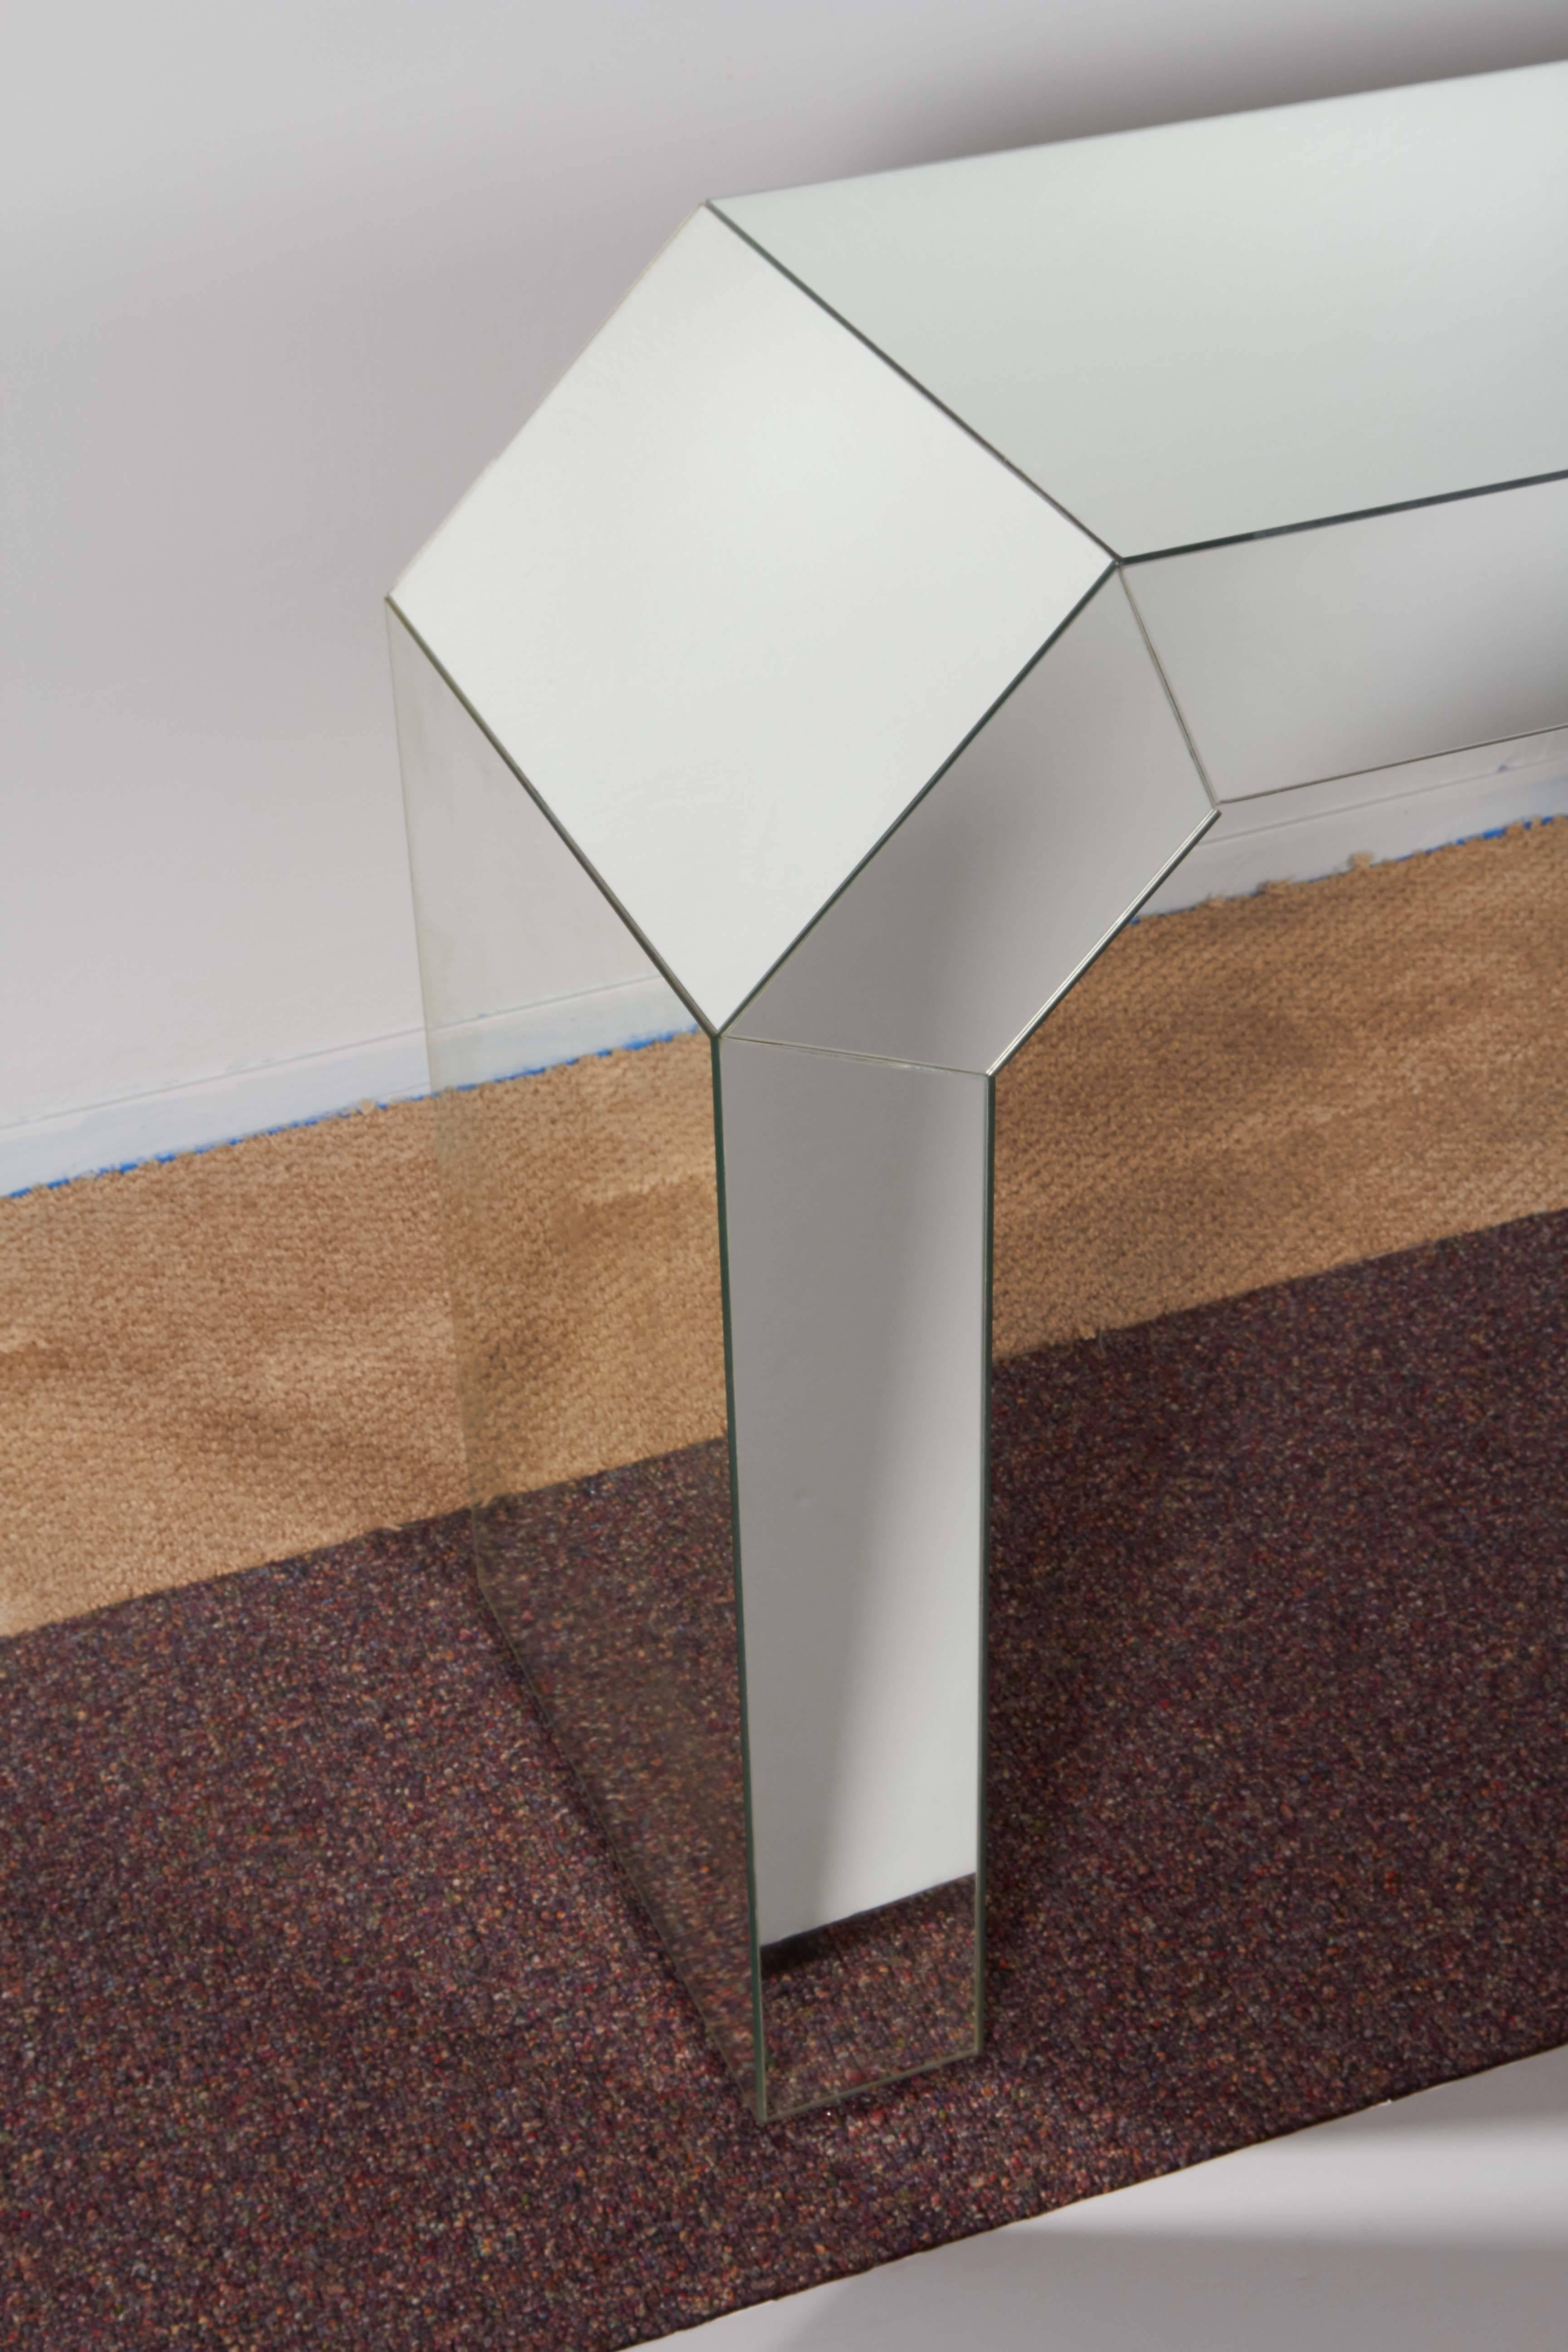 A modern geometric style mirrored console table, in Minimalist waterfall form with faceted corners. The console is in very good condition, consistent with age and use.